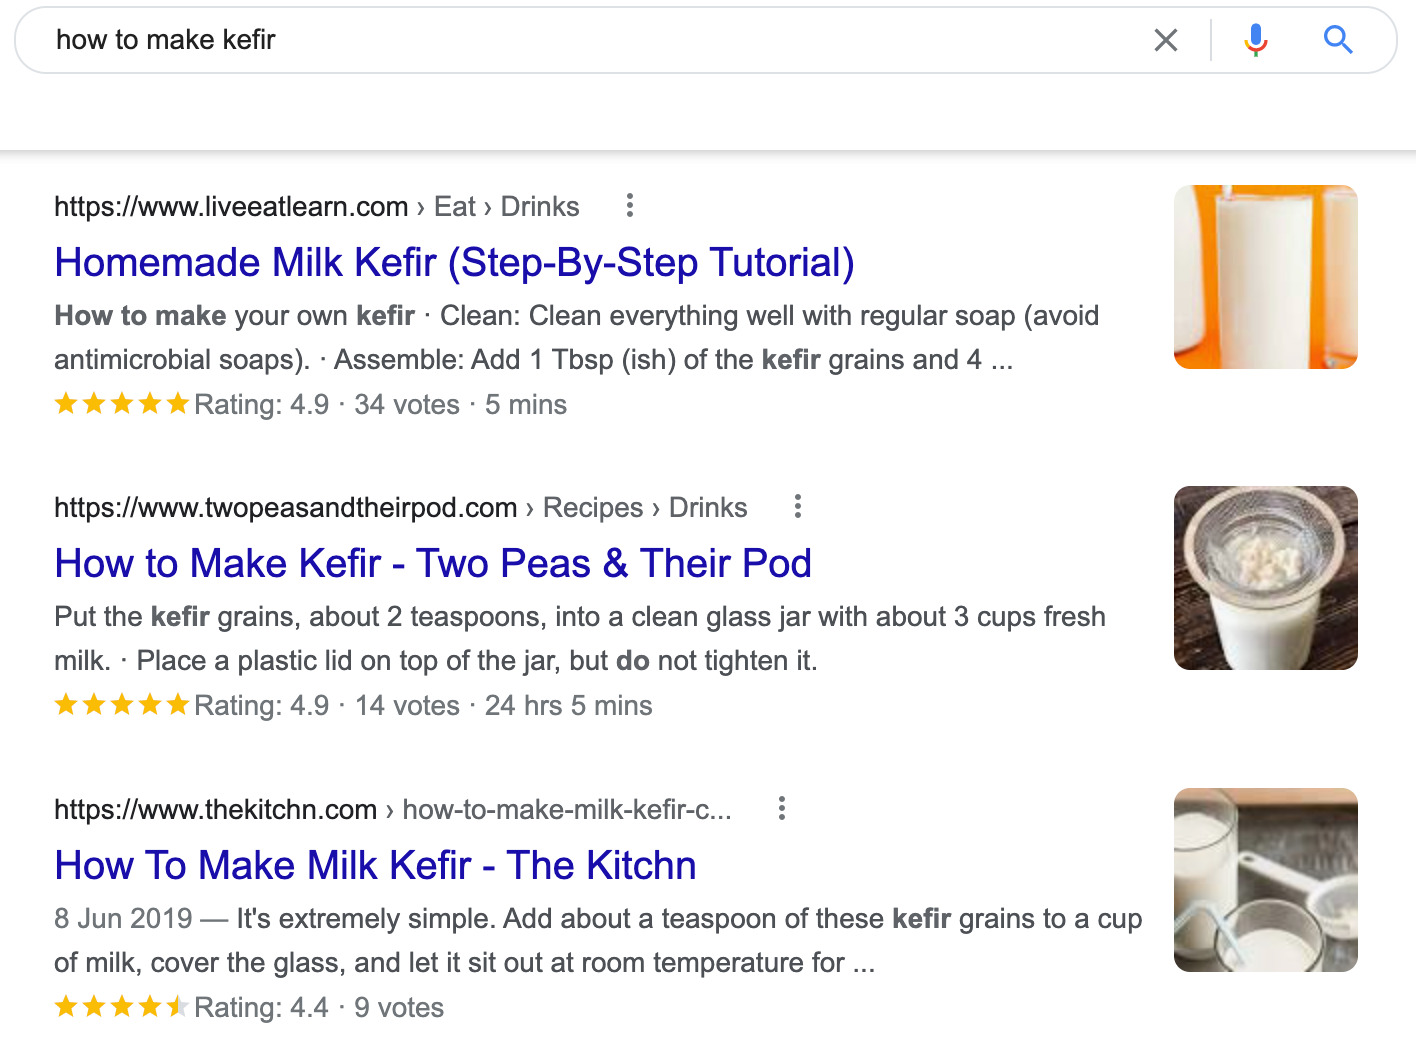 Search results for the query, "how to make kefir"
